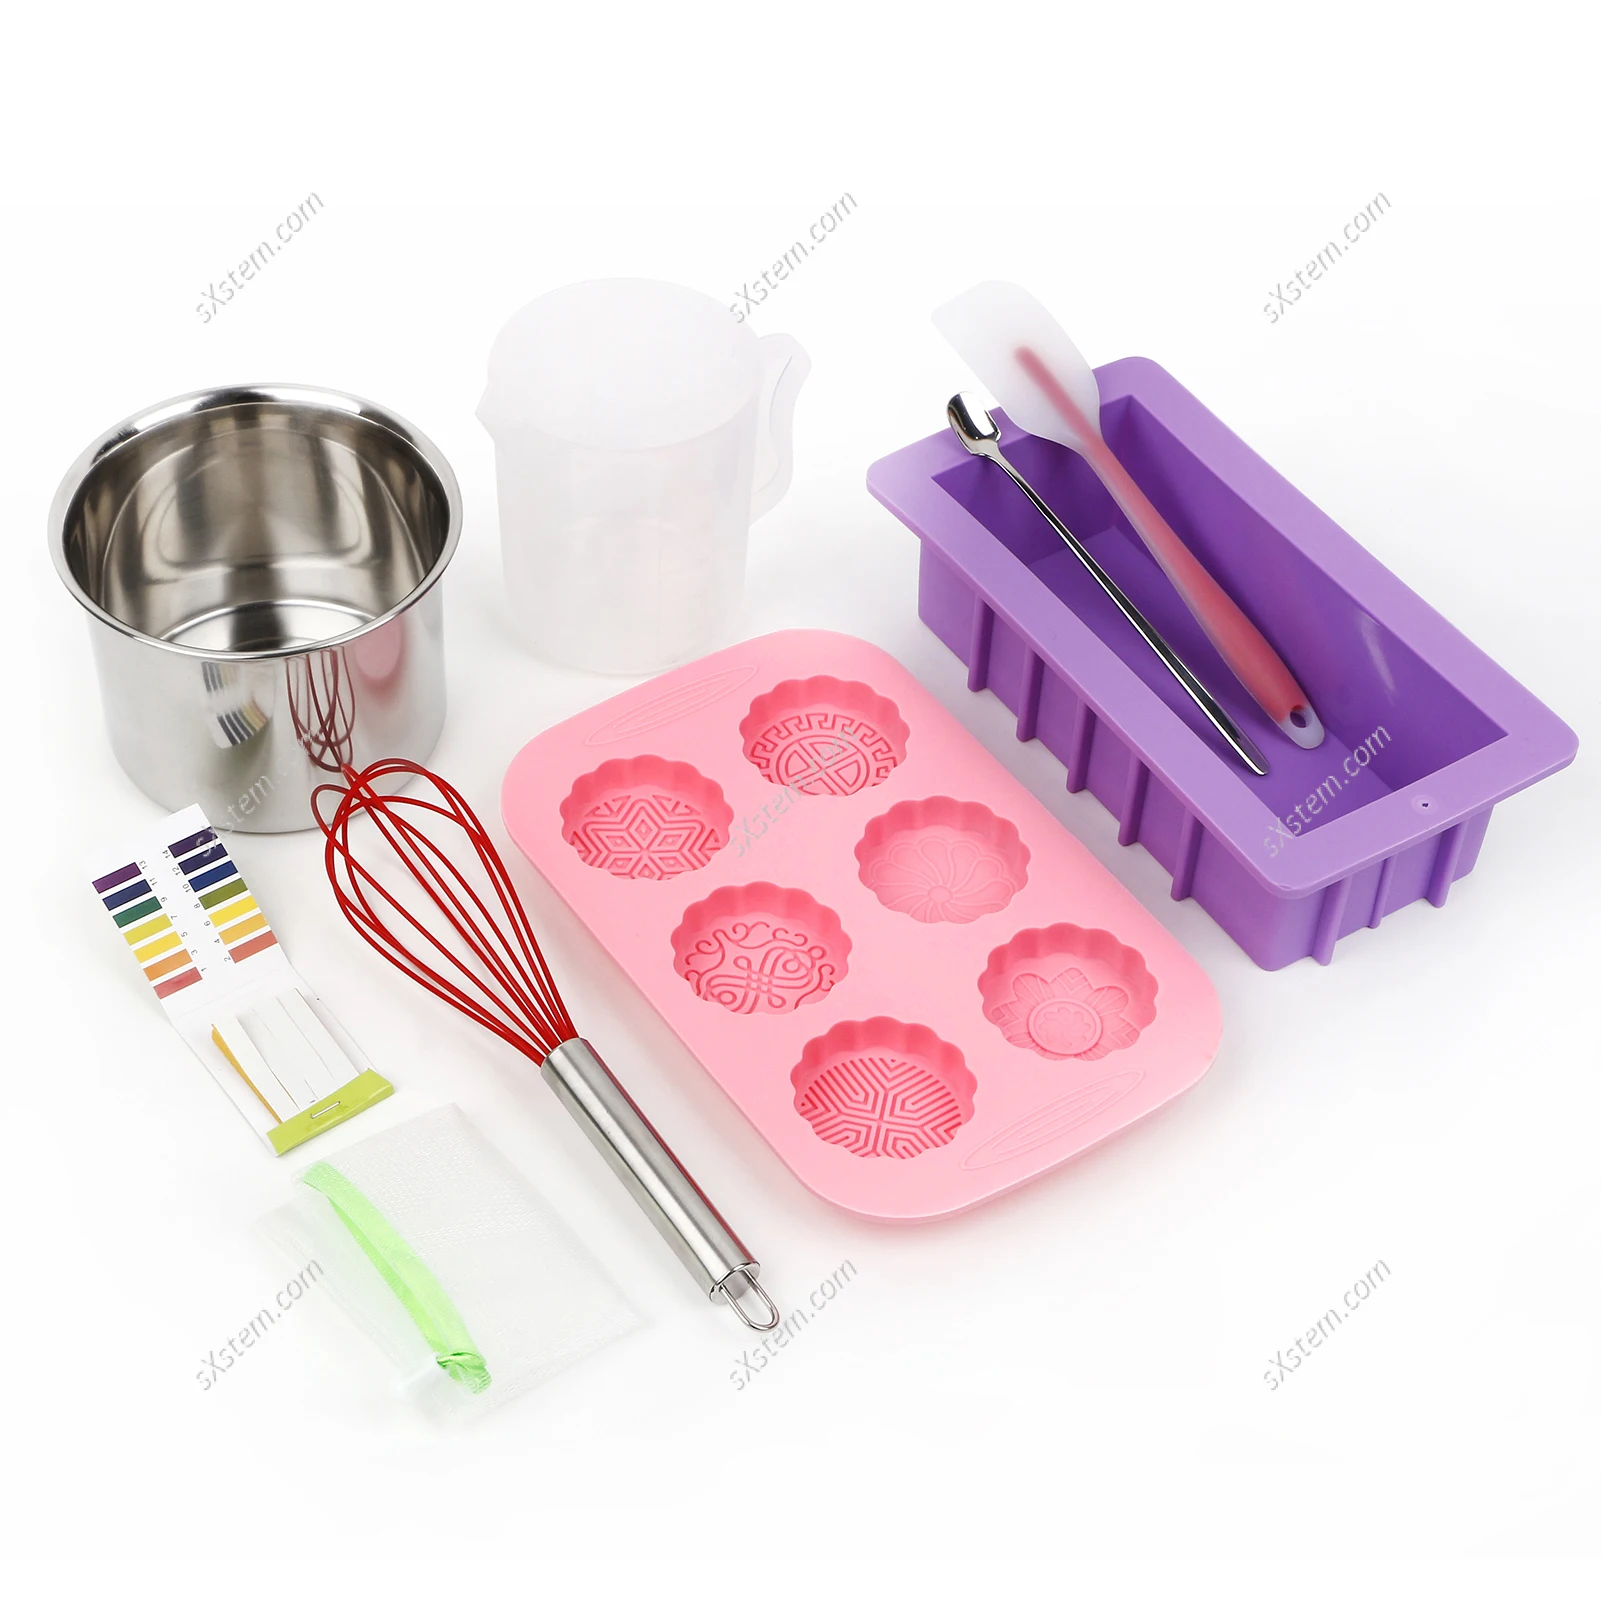 Mixing Cups With Sticks Handmade Soap Aromatherapy Candles Making Tool Set Handmade Gifts Home Making Kit